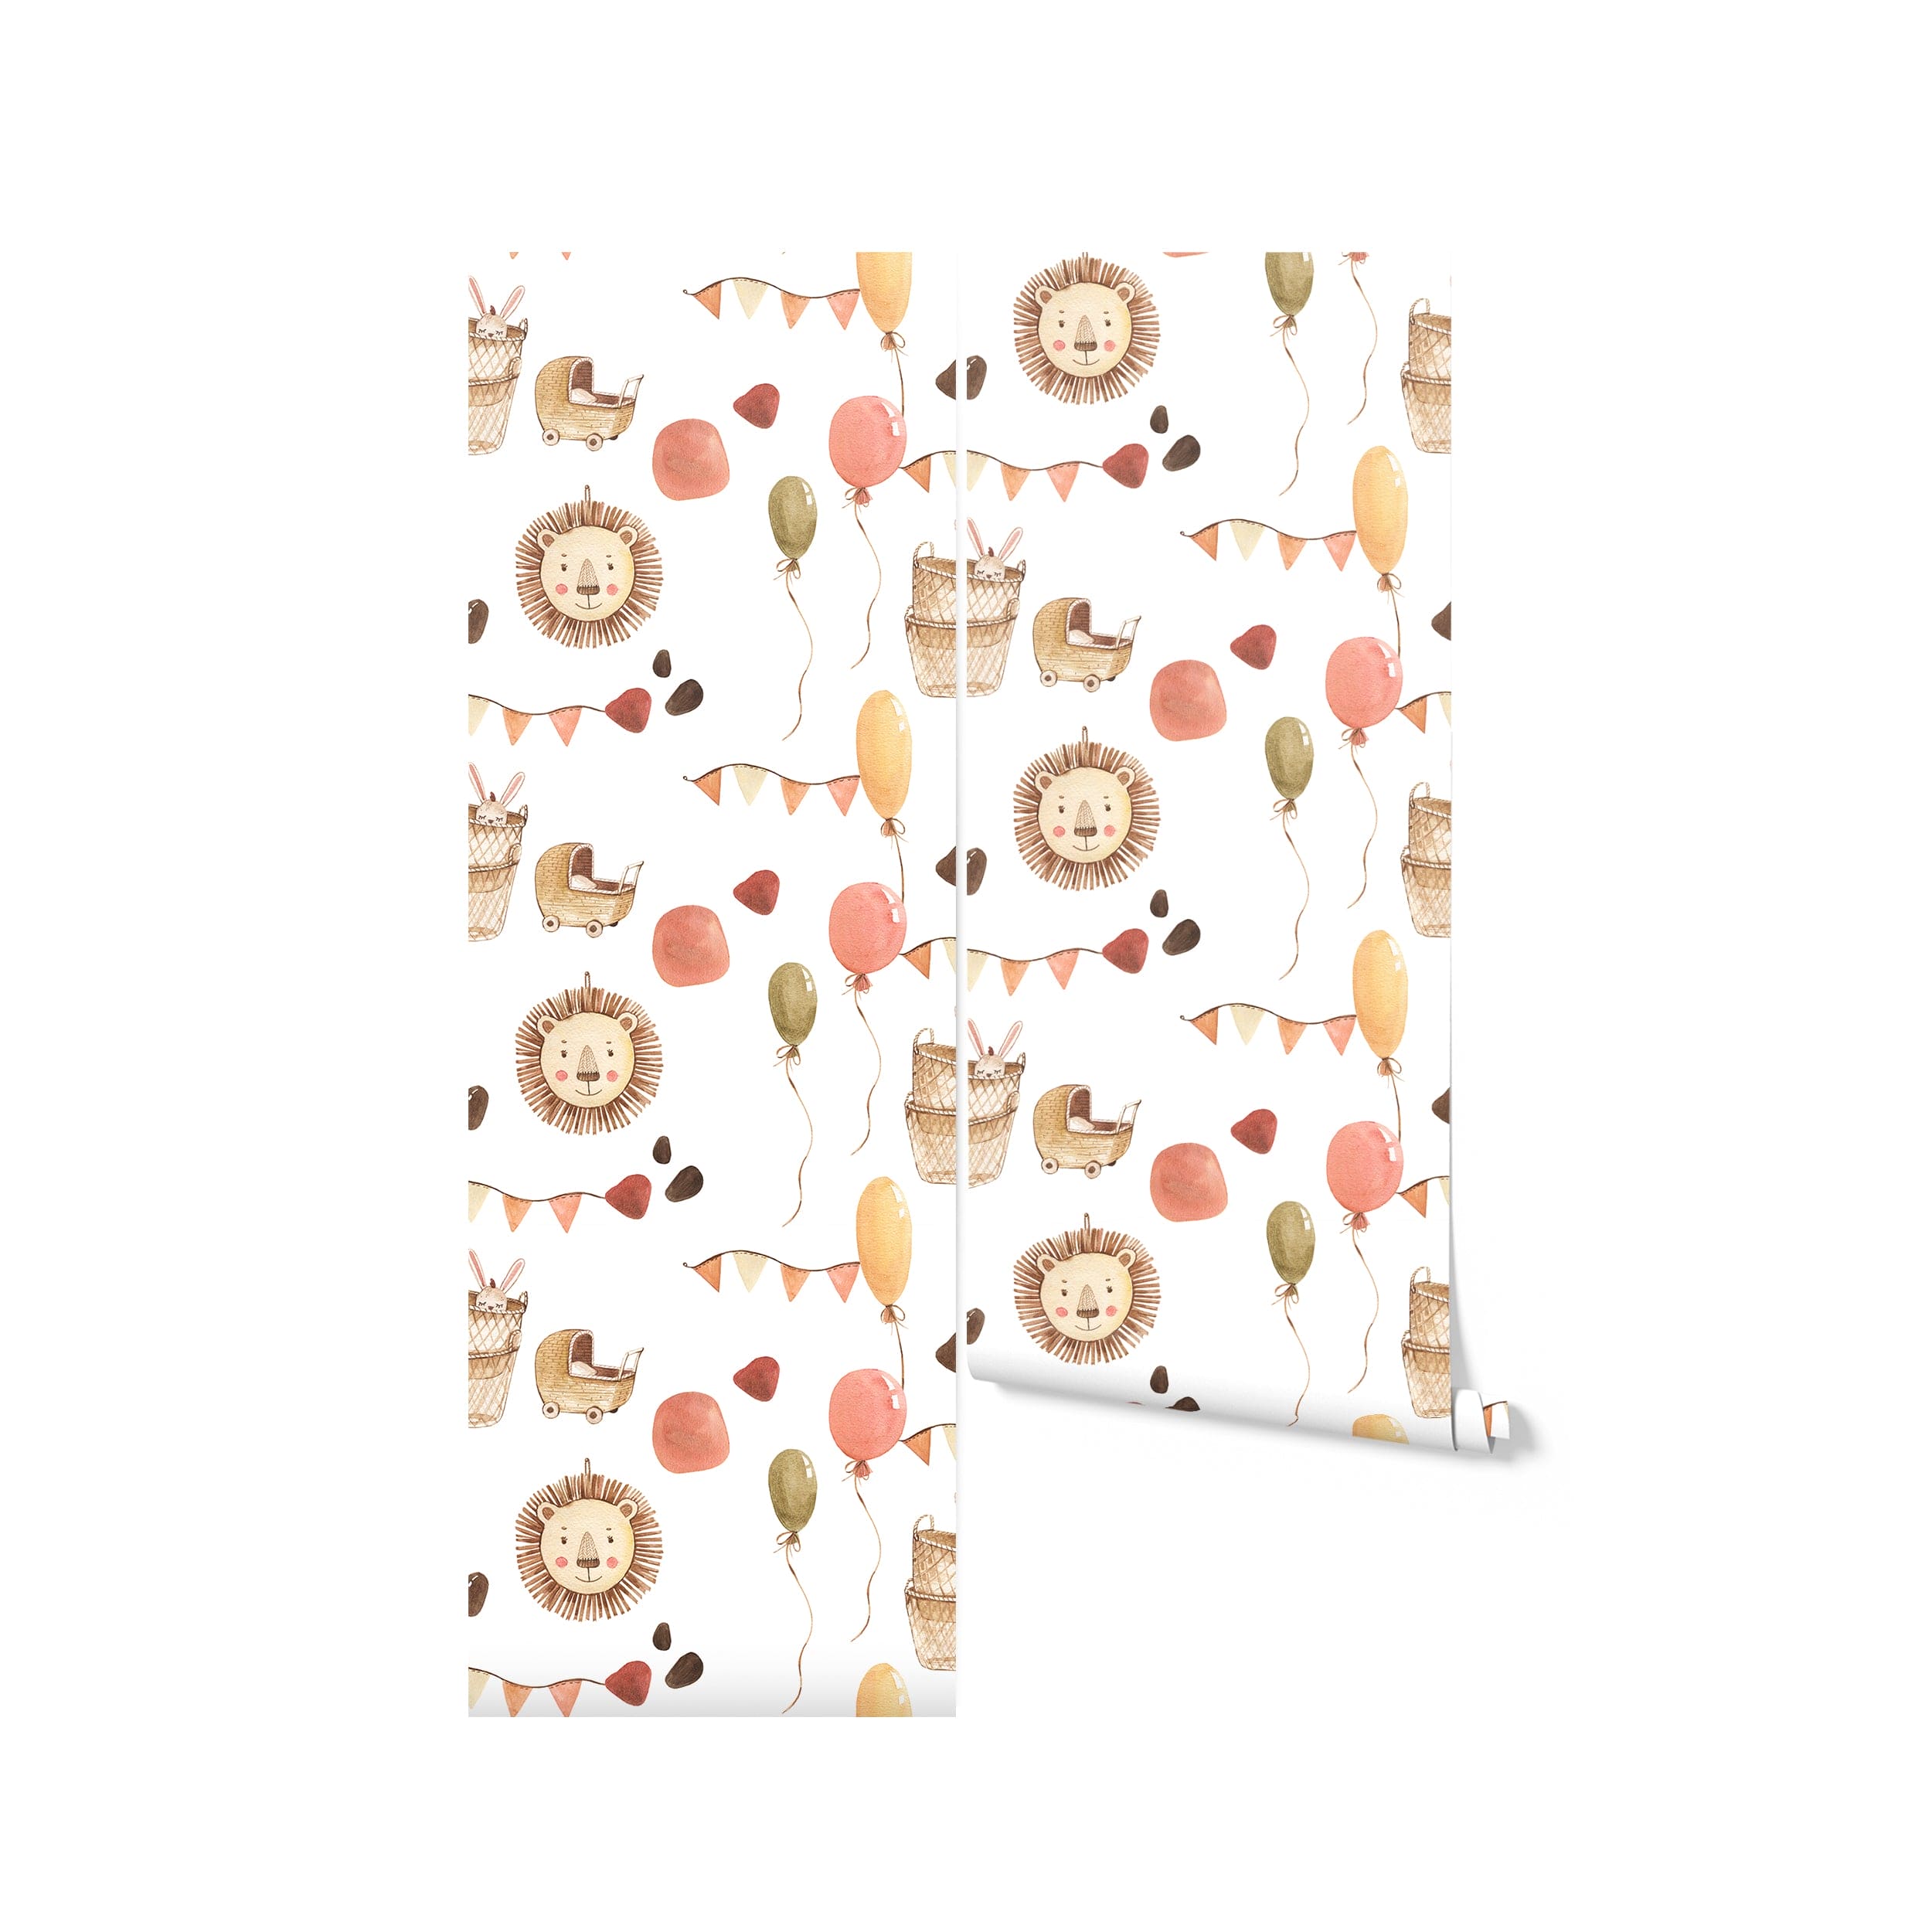 Roll of nursery-themed wallpaper unfurled slightly to reveal a continuous pattern of lions, rabbits in baskets, balloons, and bunting flags in soft, pastel watercolors. The design is ideal for a gentle and inviting baby room ambiance.